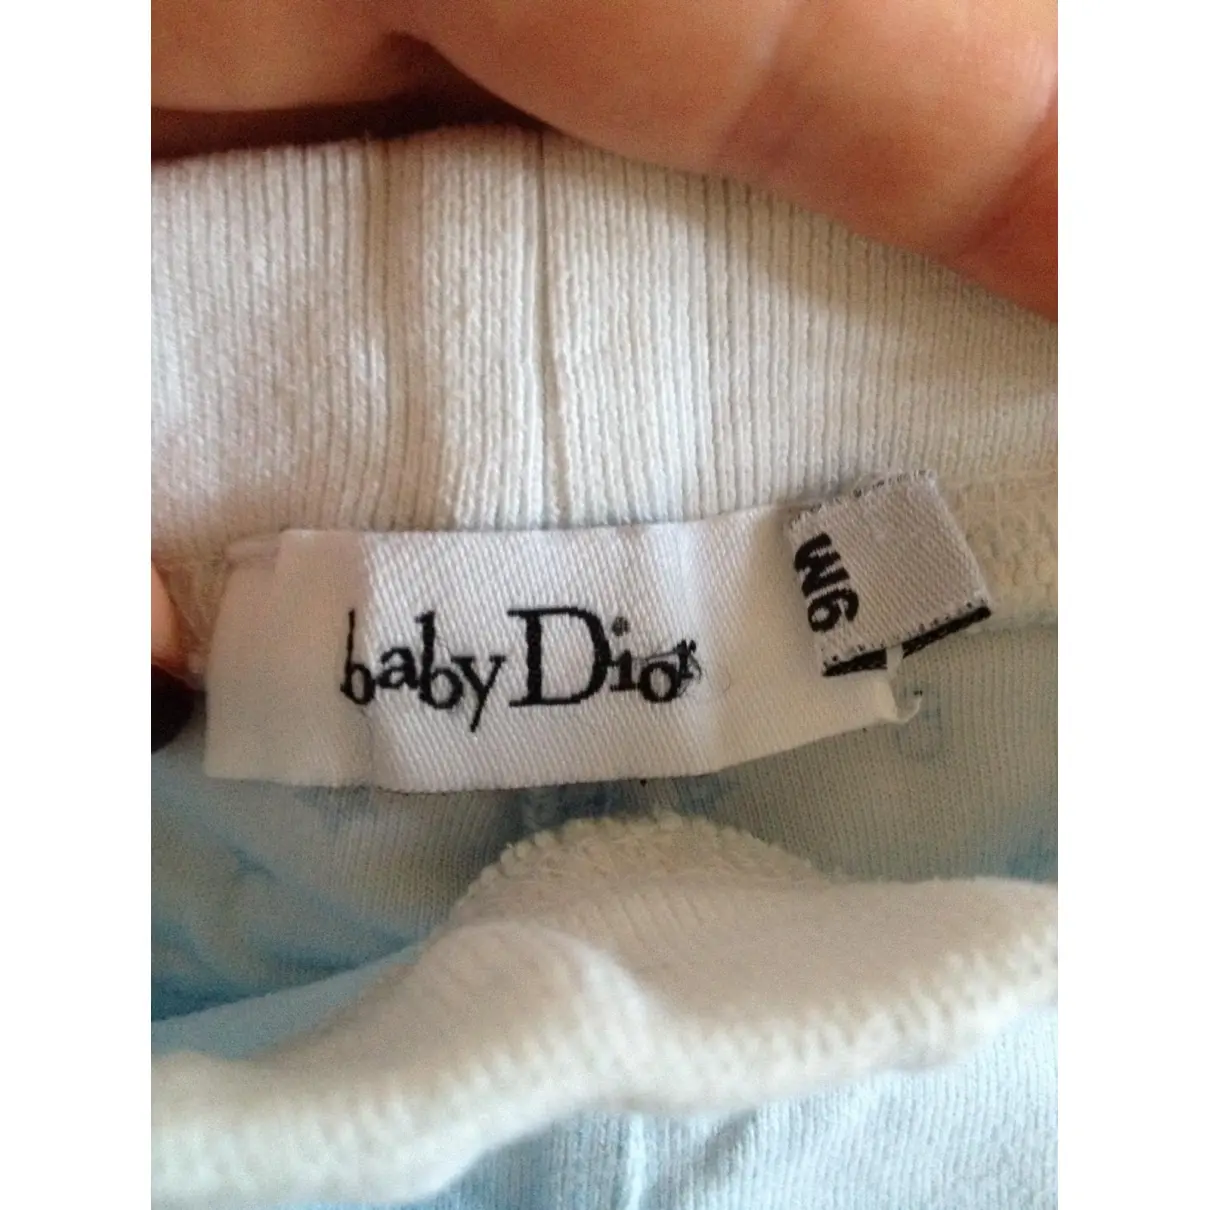 Buy Baby Dior Trousers online